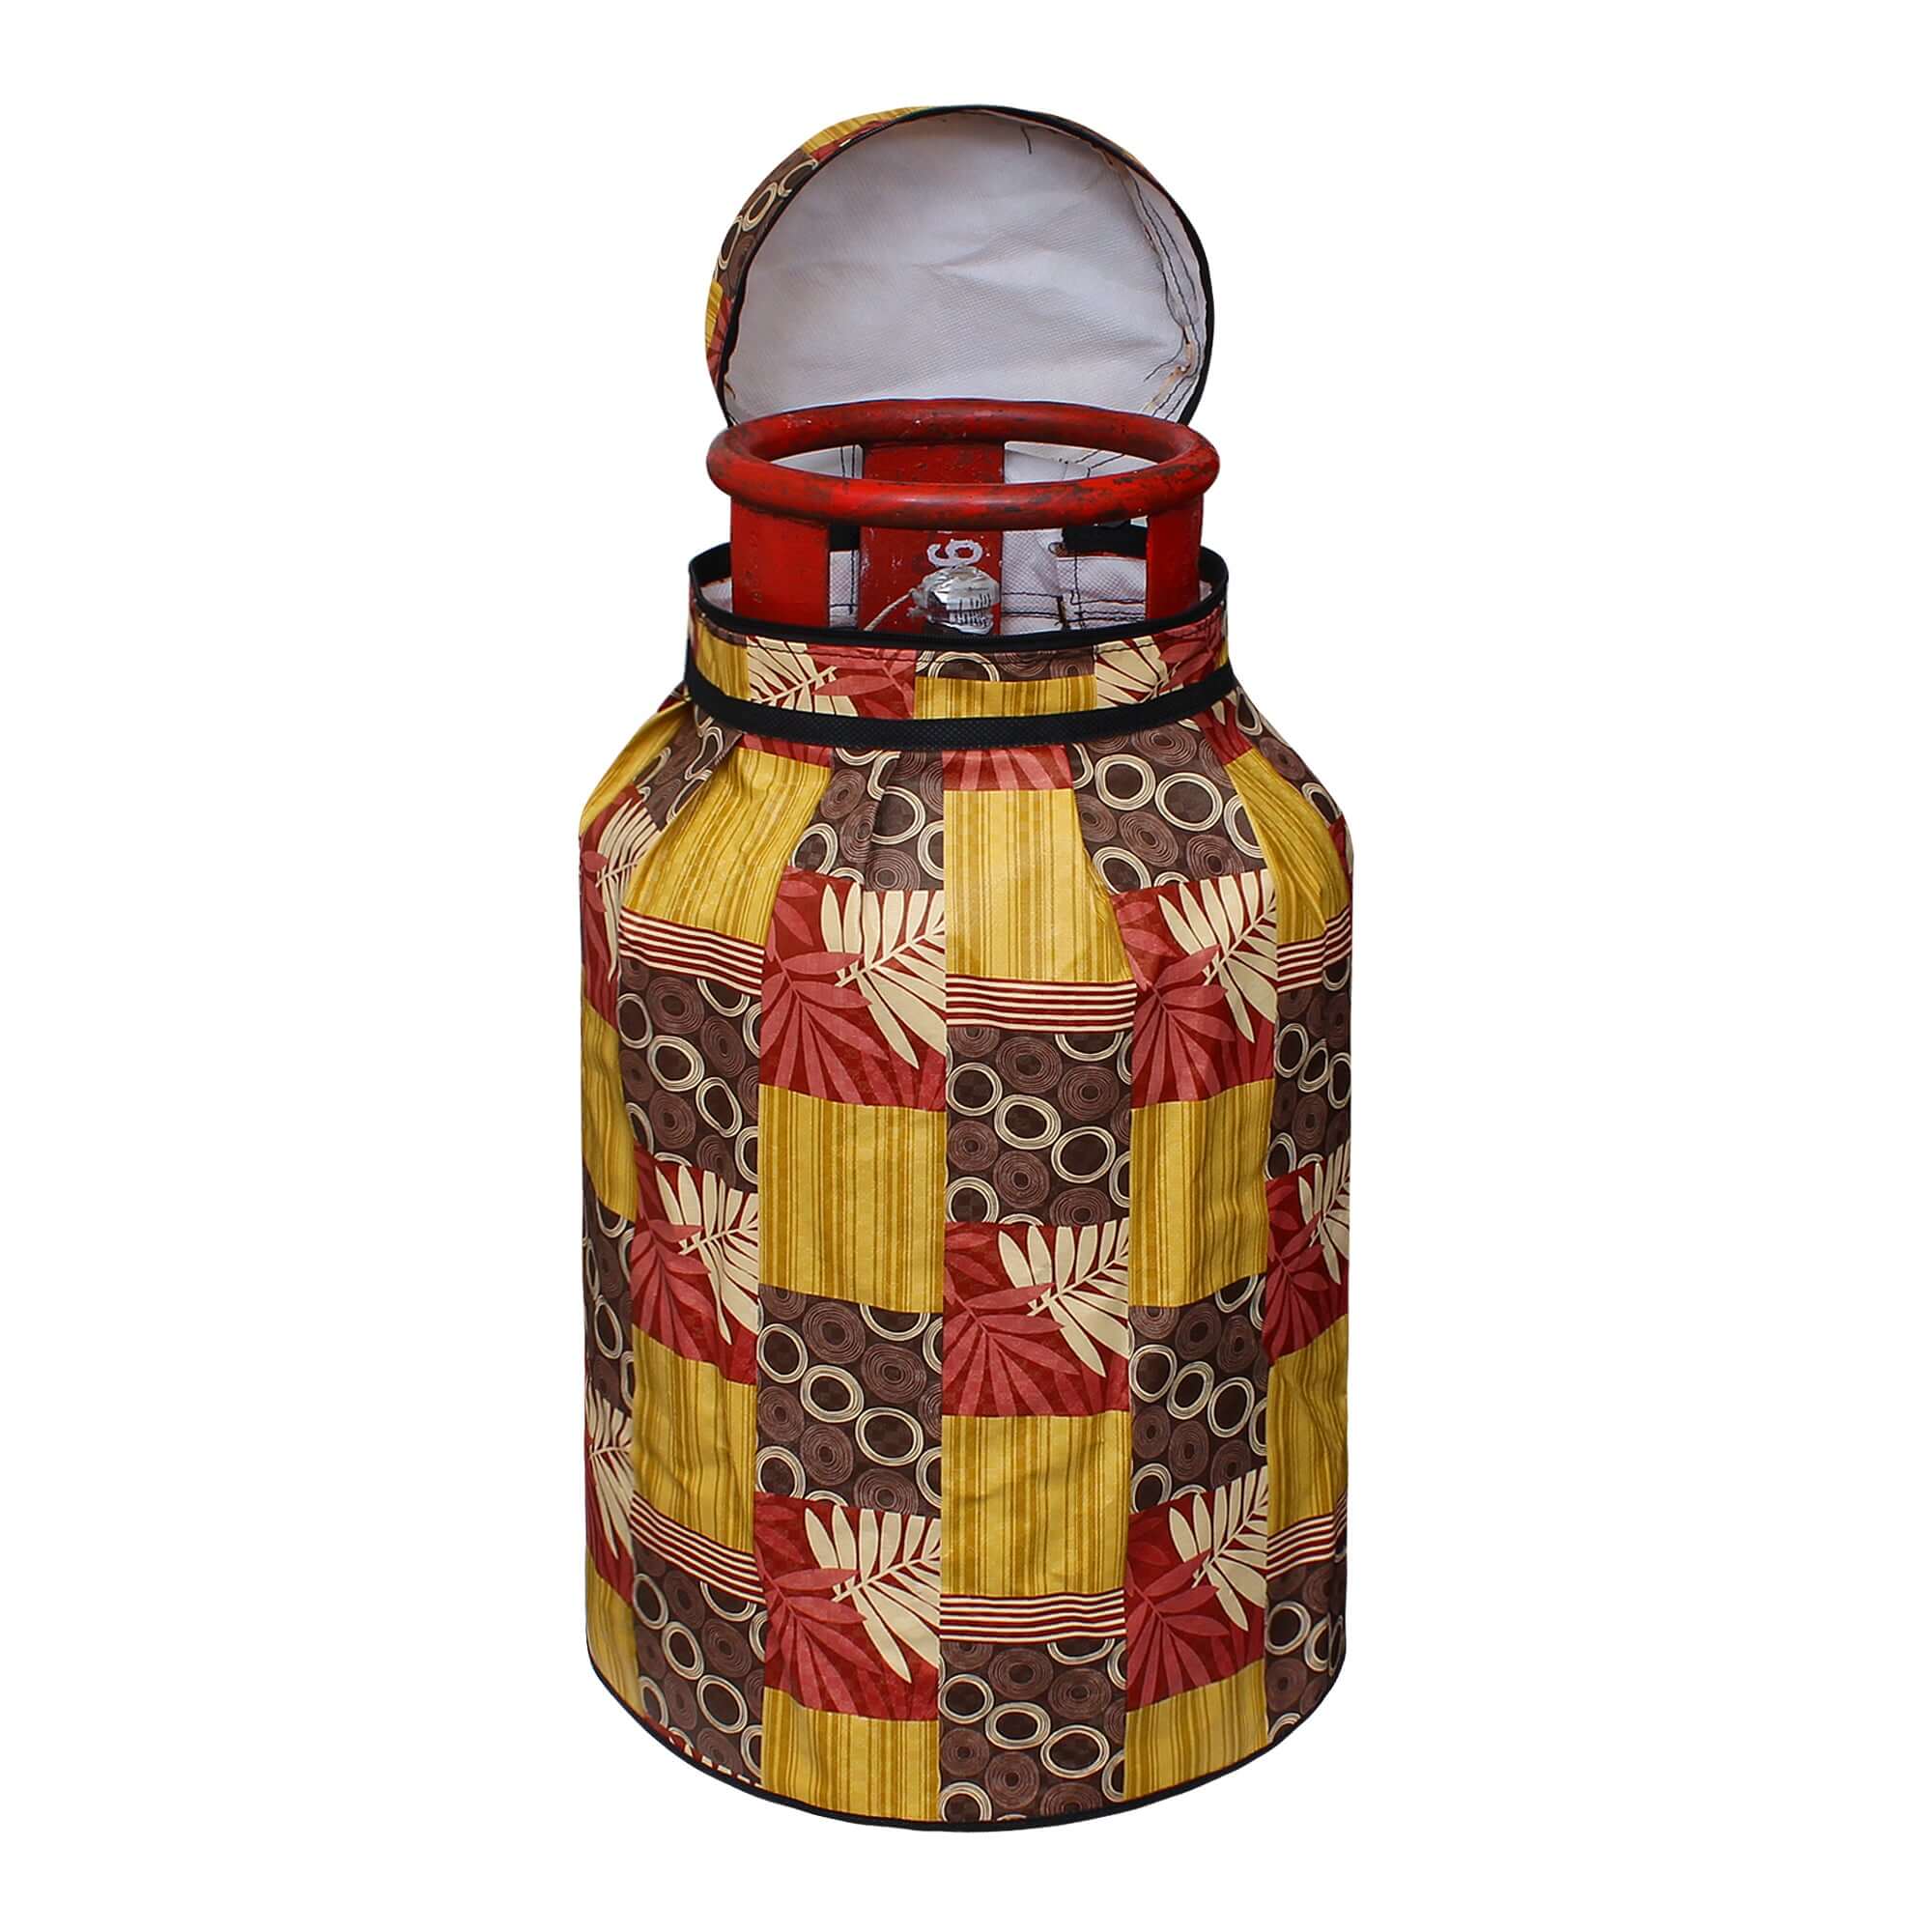 LPG Gas Cylinder Cover, SA01 - Dream Care Furnishings Private Limited